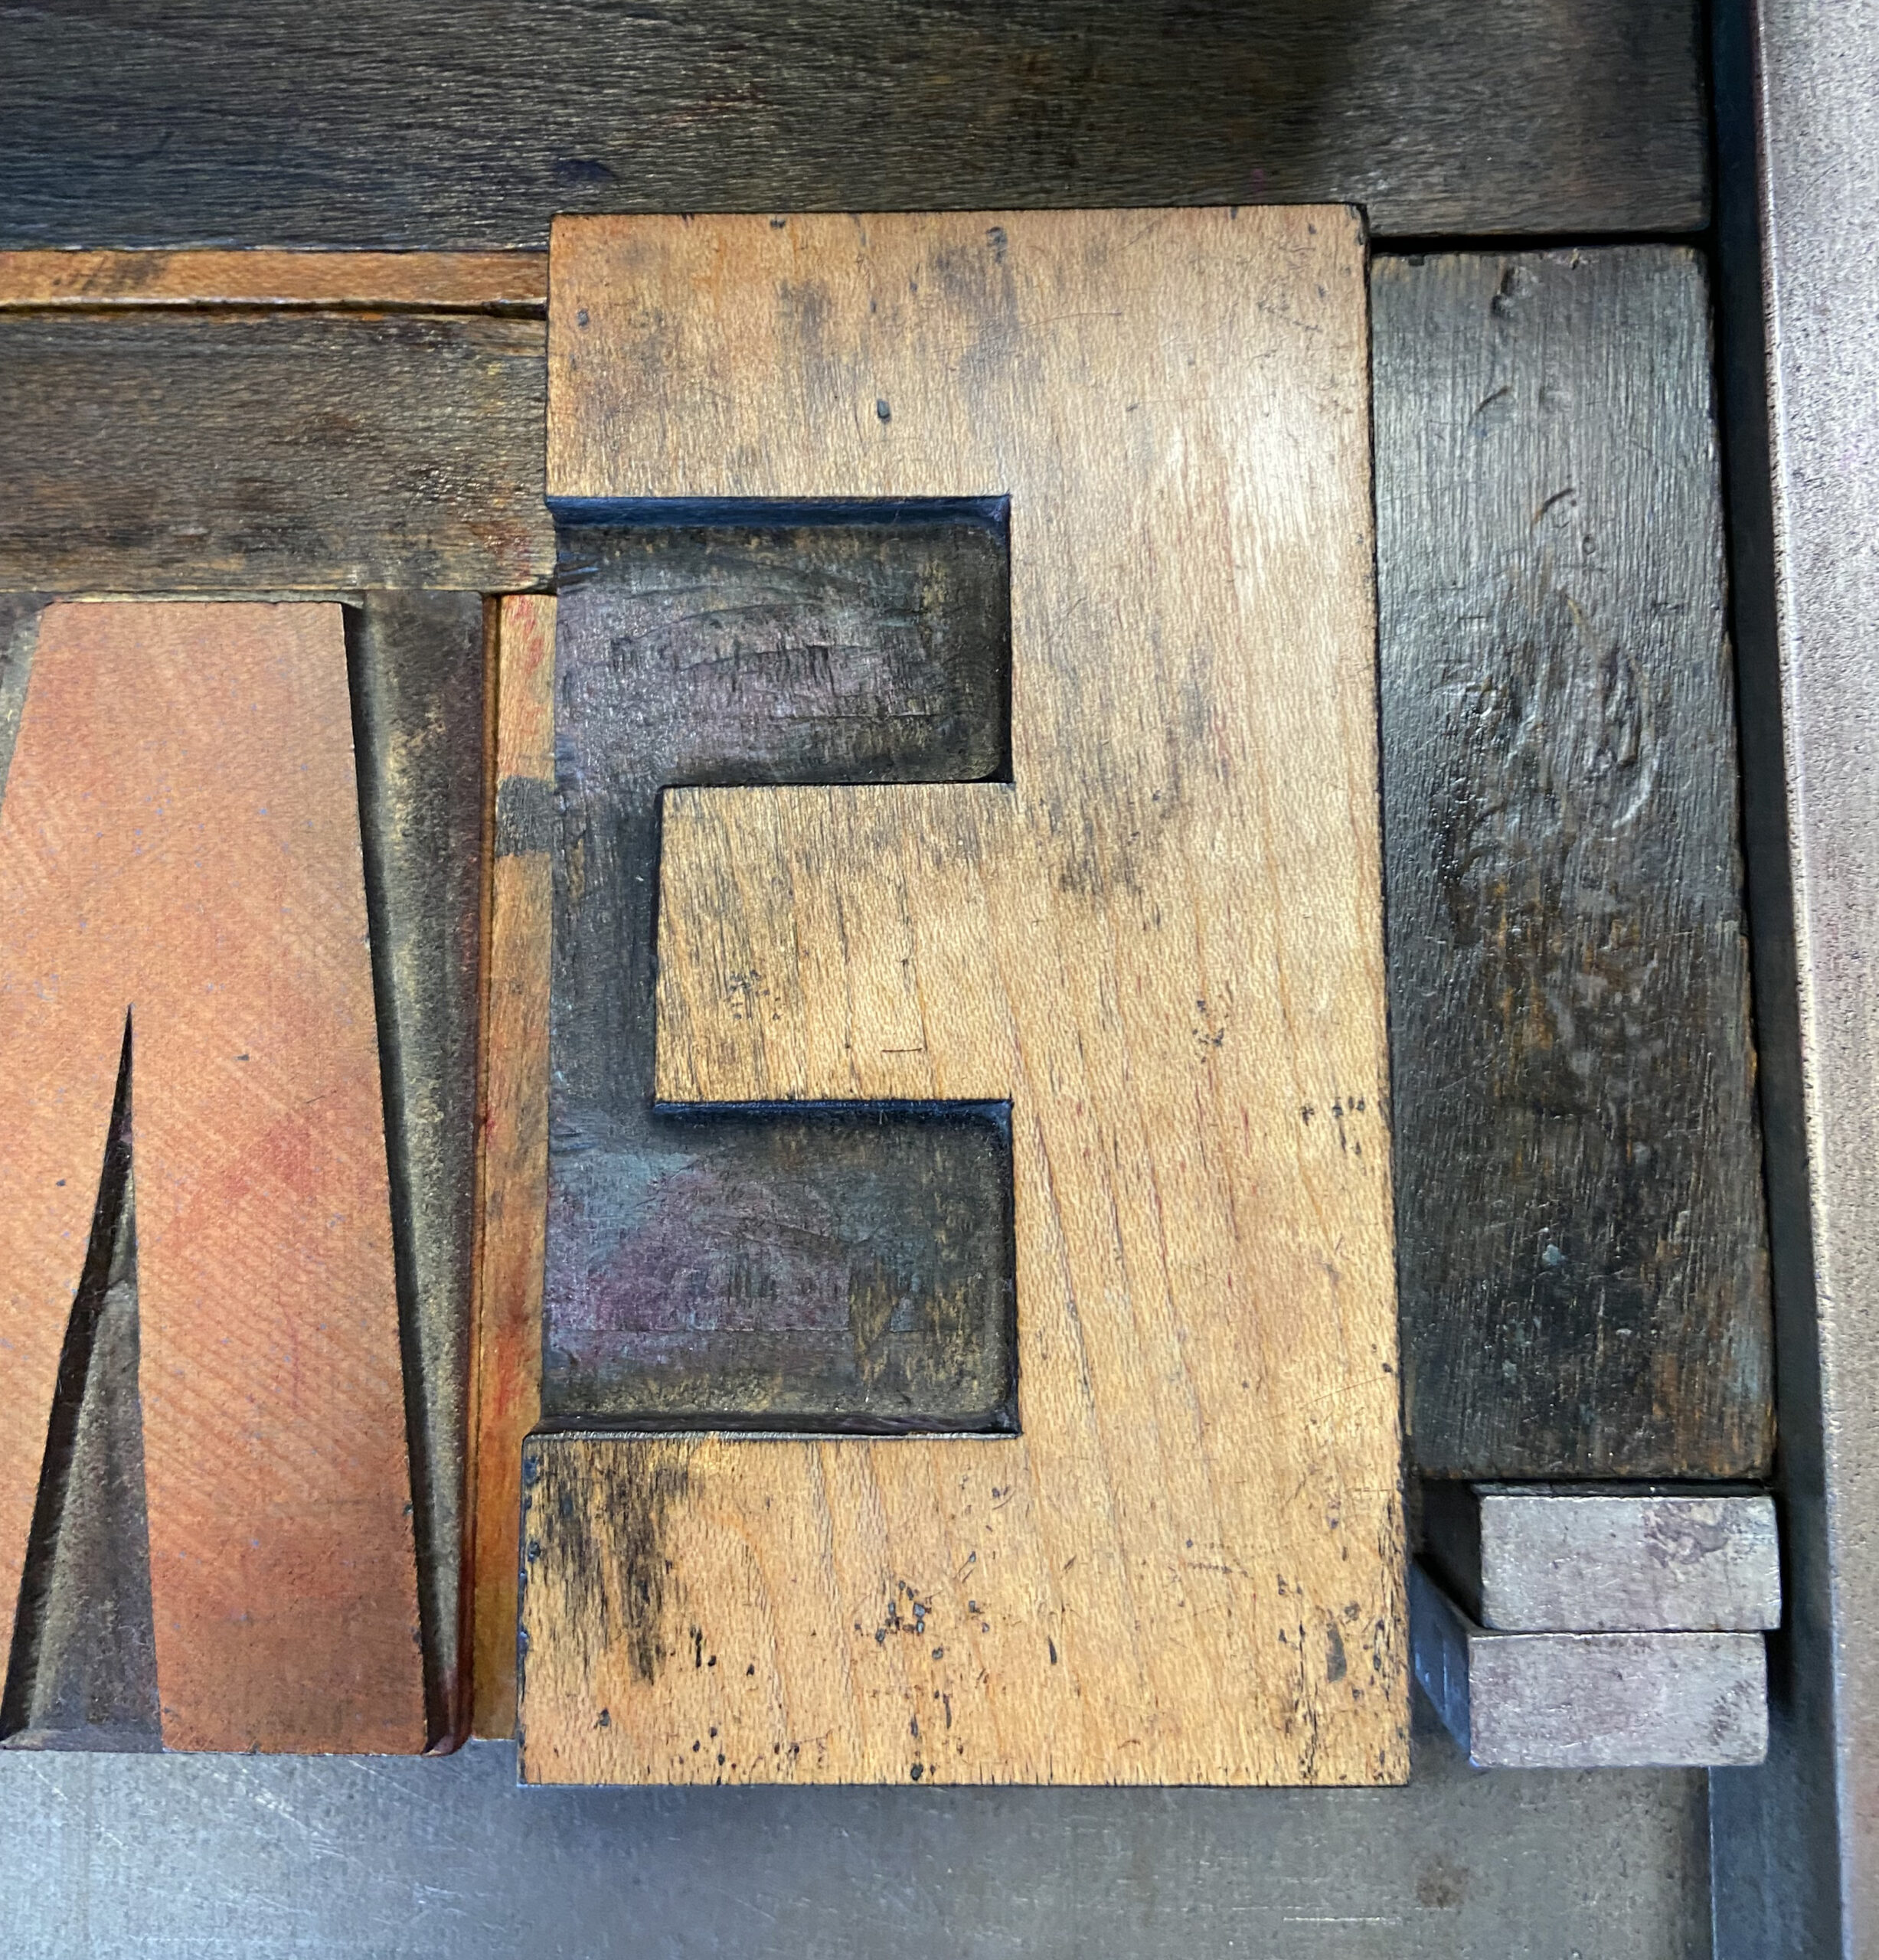 Letterpress Club: All Types of Type